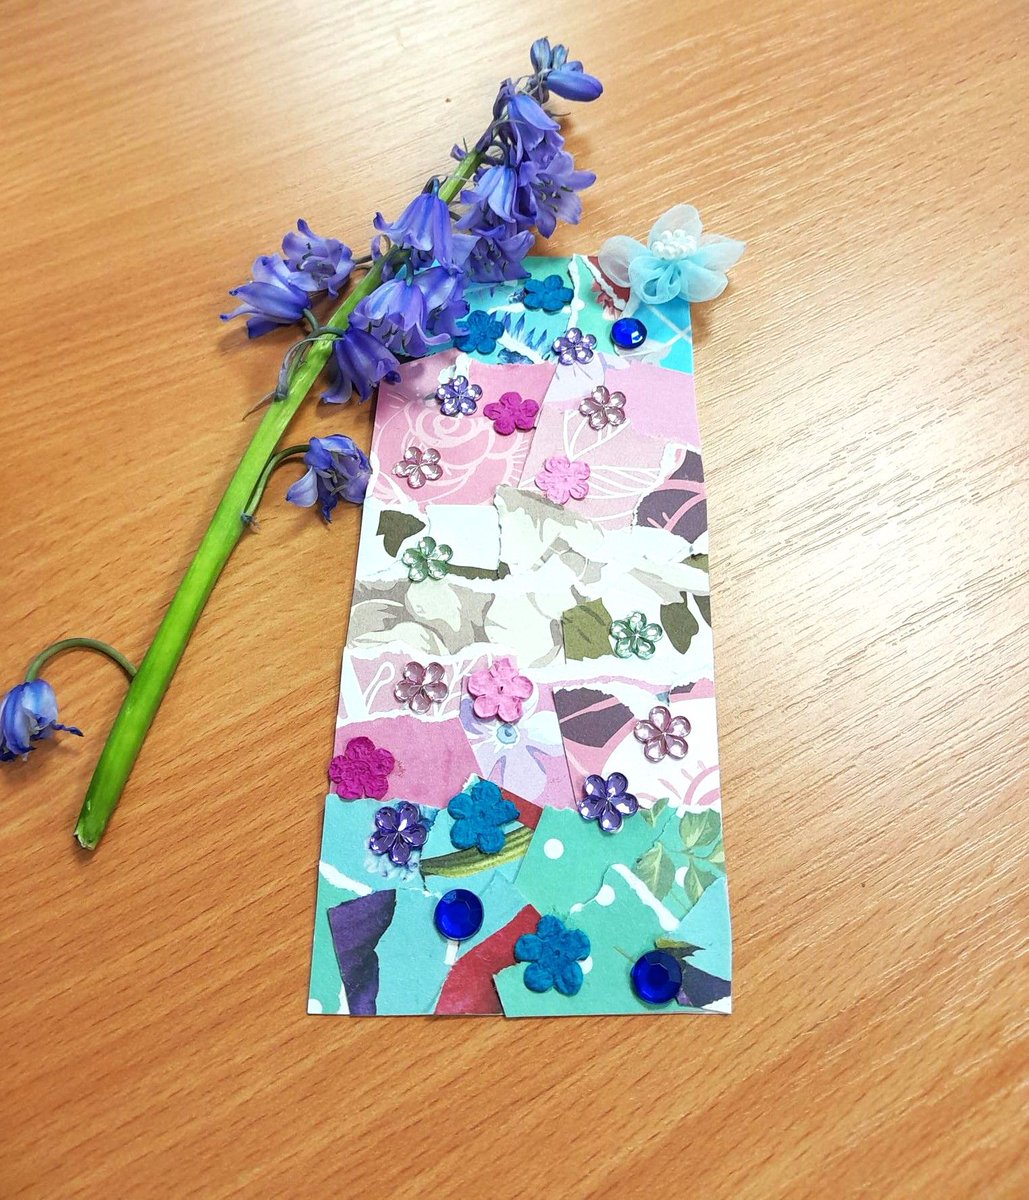 Last week our IOW group created pieces of art to represent National Trans HIV Testing Day. If you, or someone you know, would like to join a Breakout Youth support group, we would love to hear from you! #LGBT #LGBTQ #youthgroup #charity #youthcharity #LGBTcharity #Hampshire